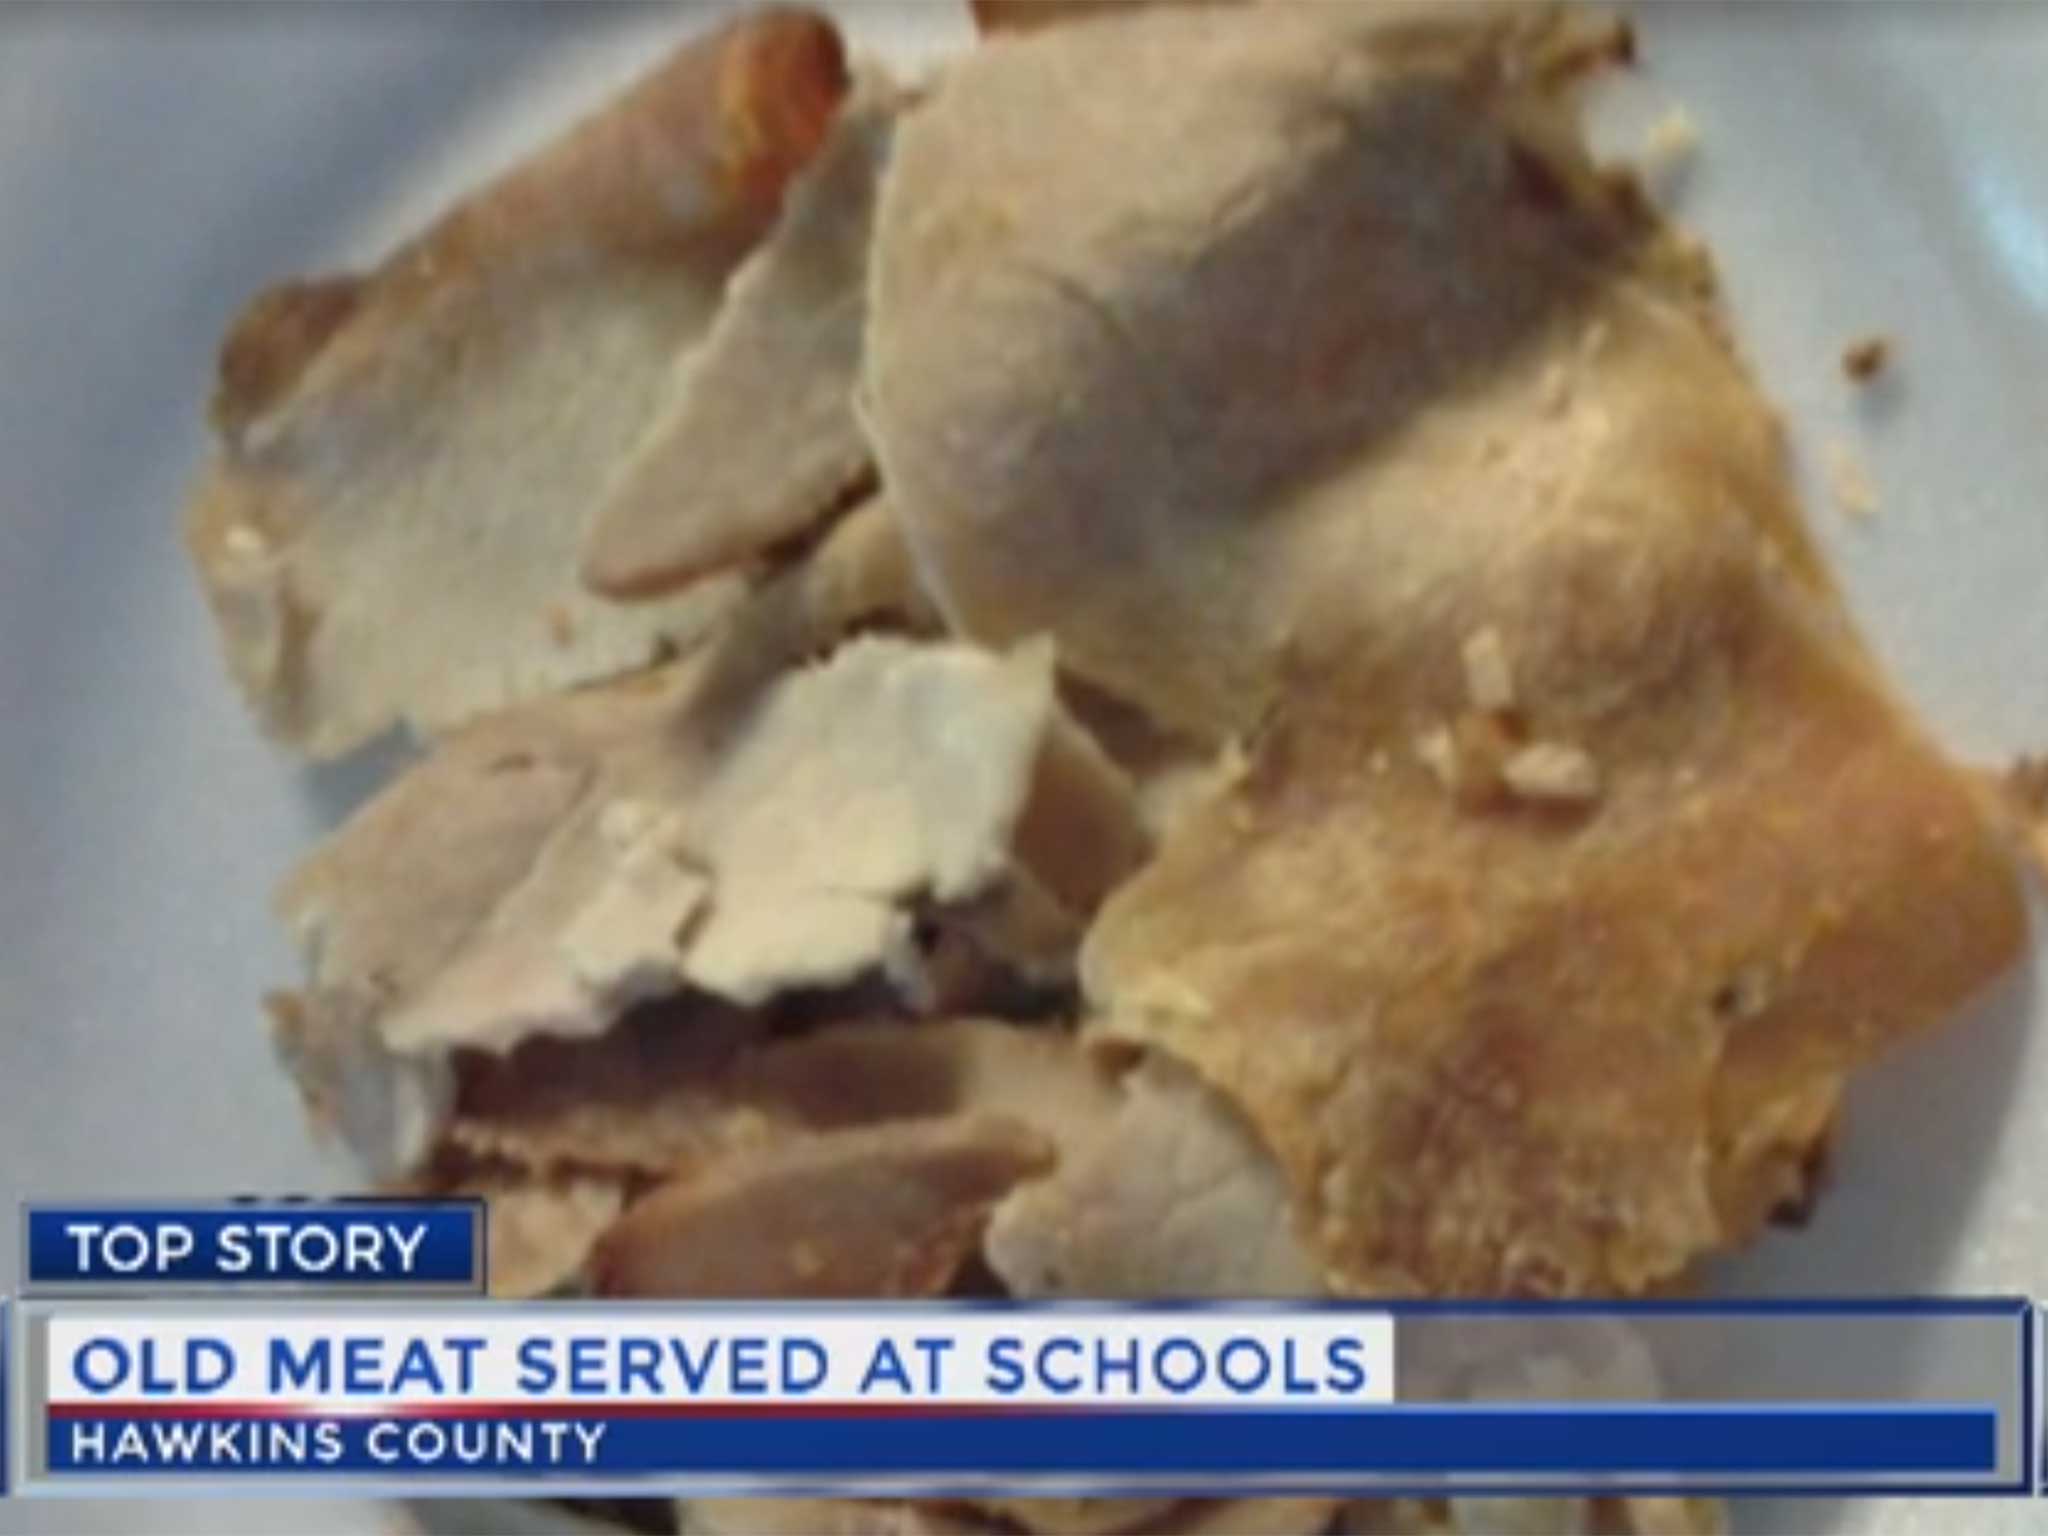 The six-year-old meat reportedly served to US school pupils